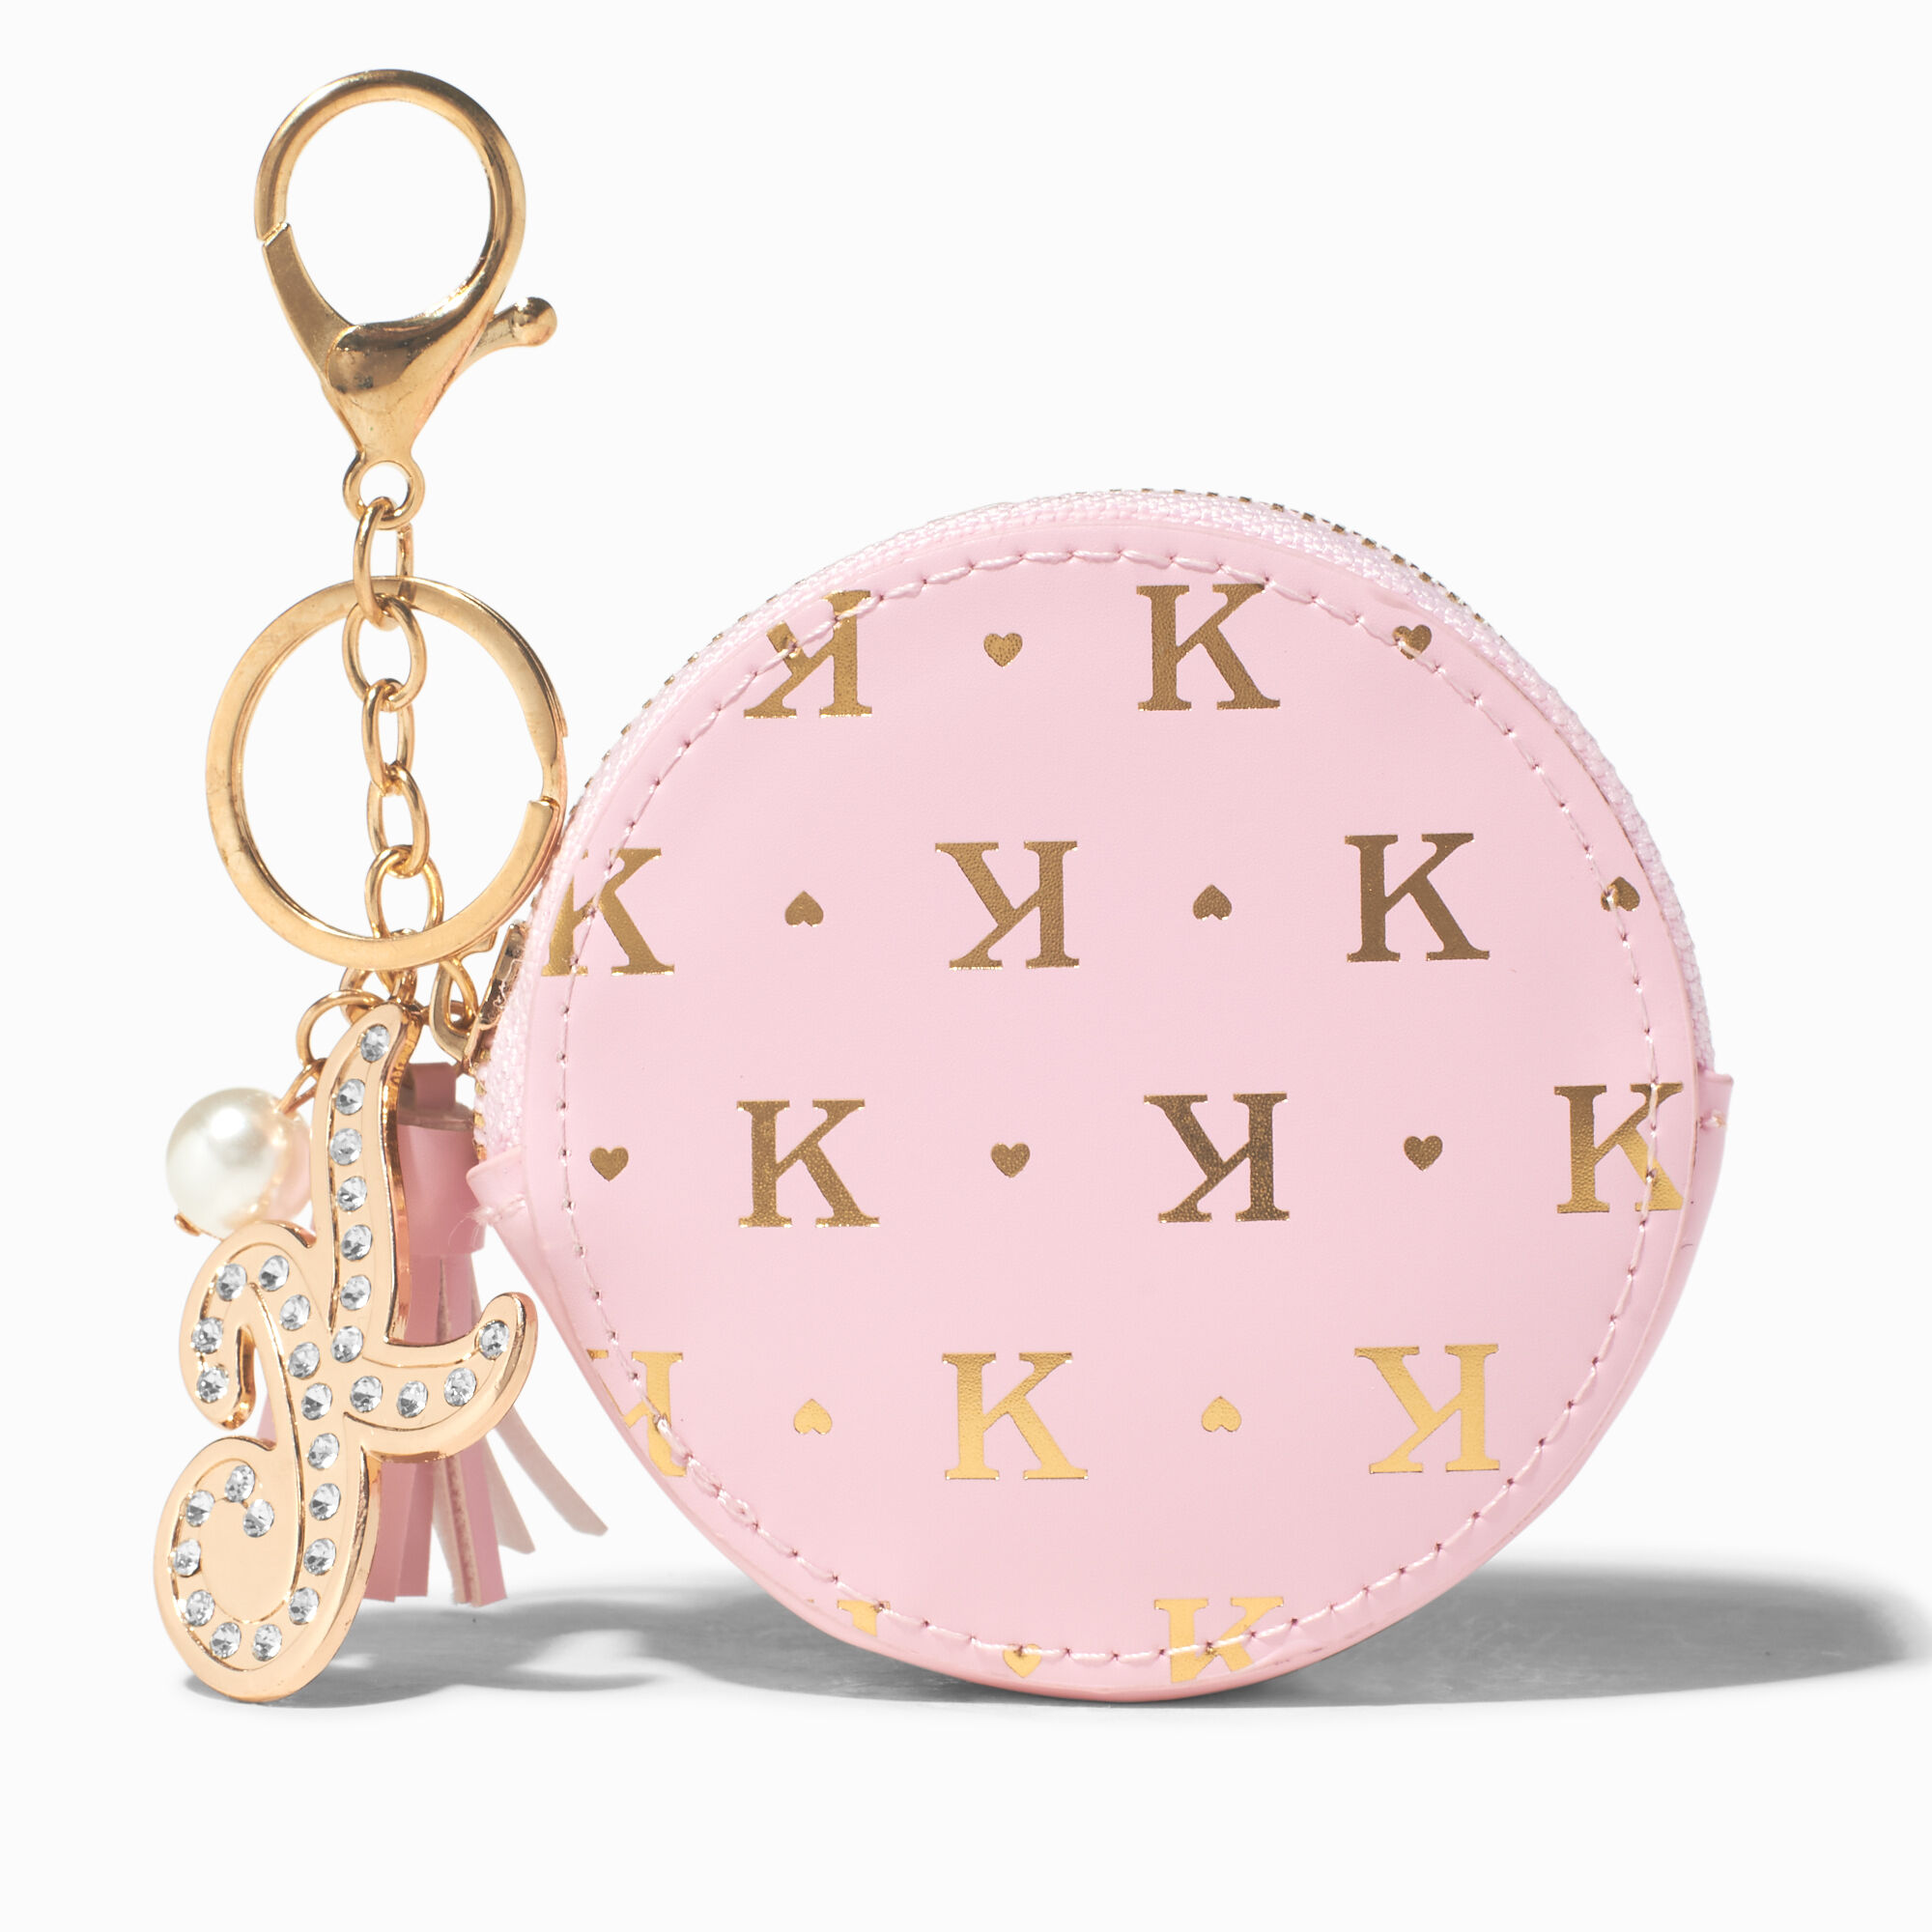 View Claires en Initial Coin Purse K Gold information